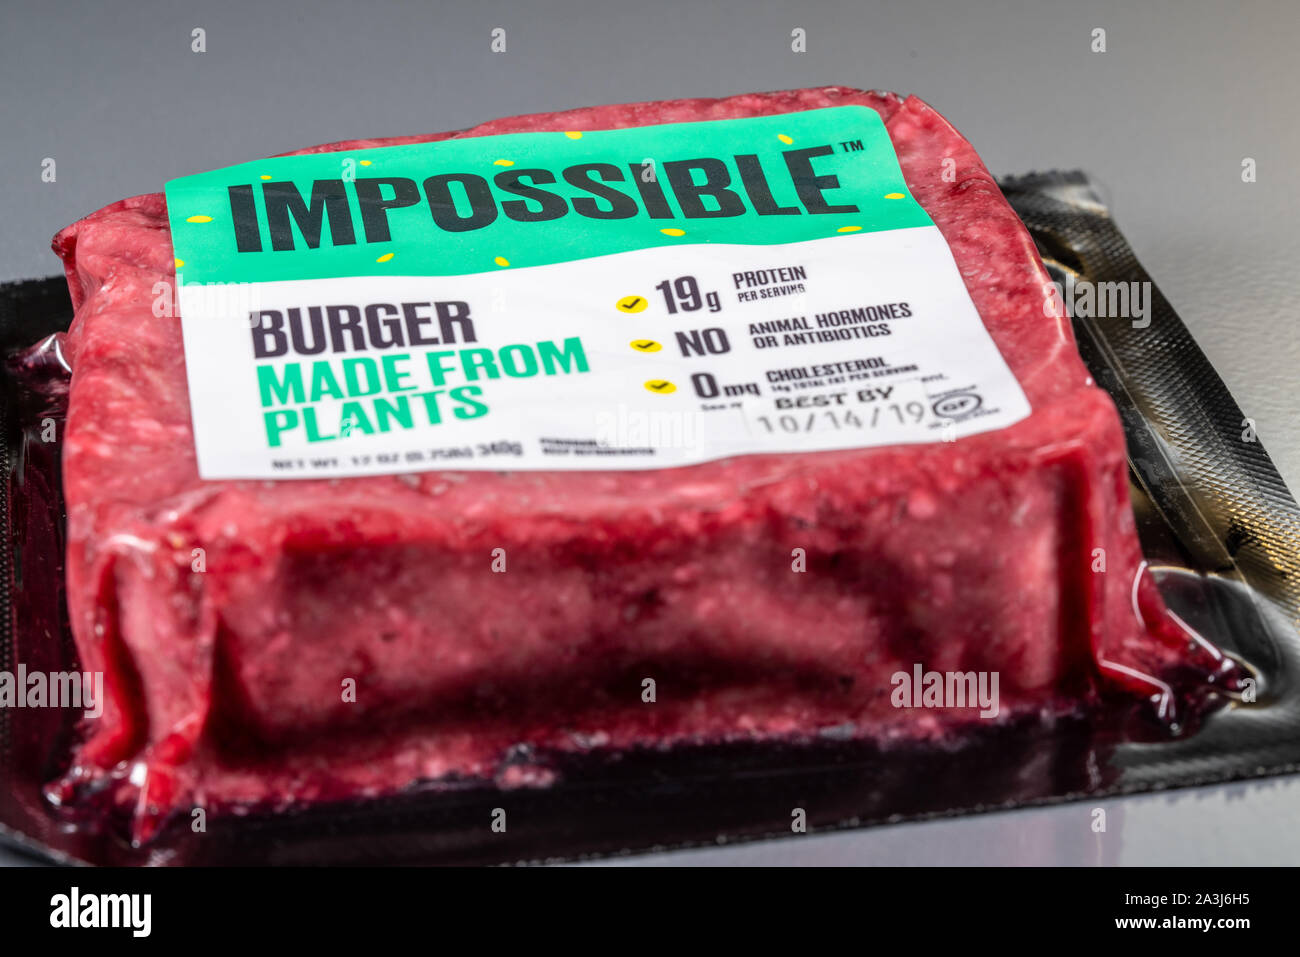 MORGANTOWN, WV - 8 October 2019: Packaging for Impossible Foods burger made from plants on steel background Stock Photo